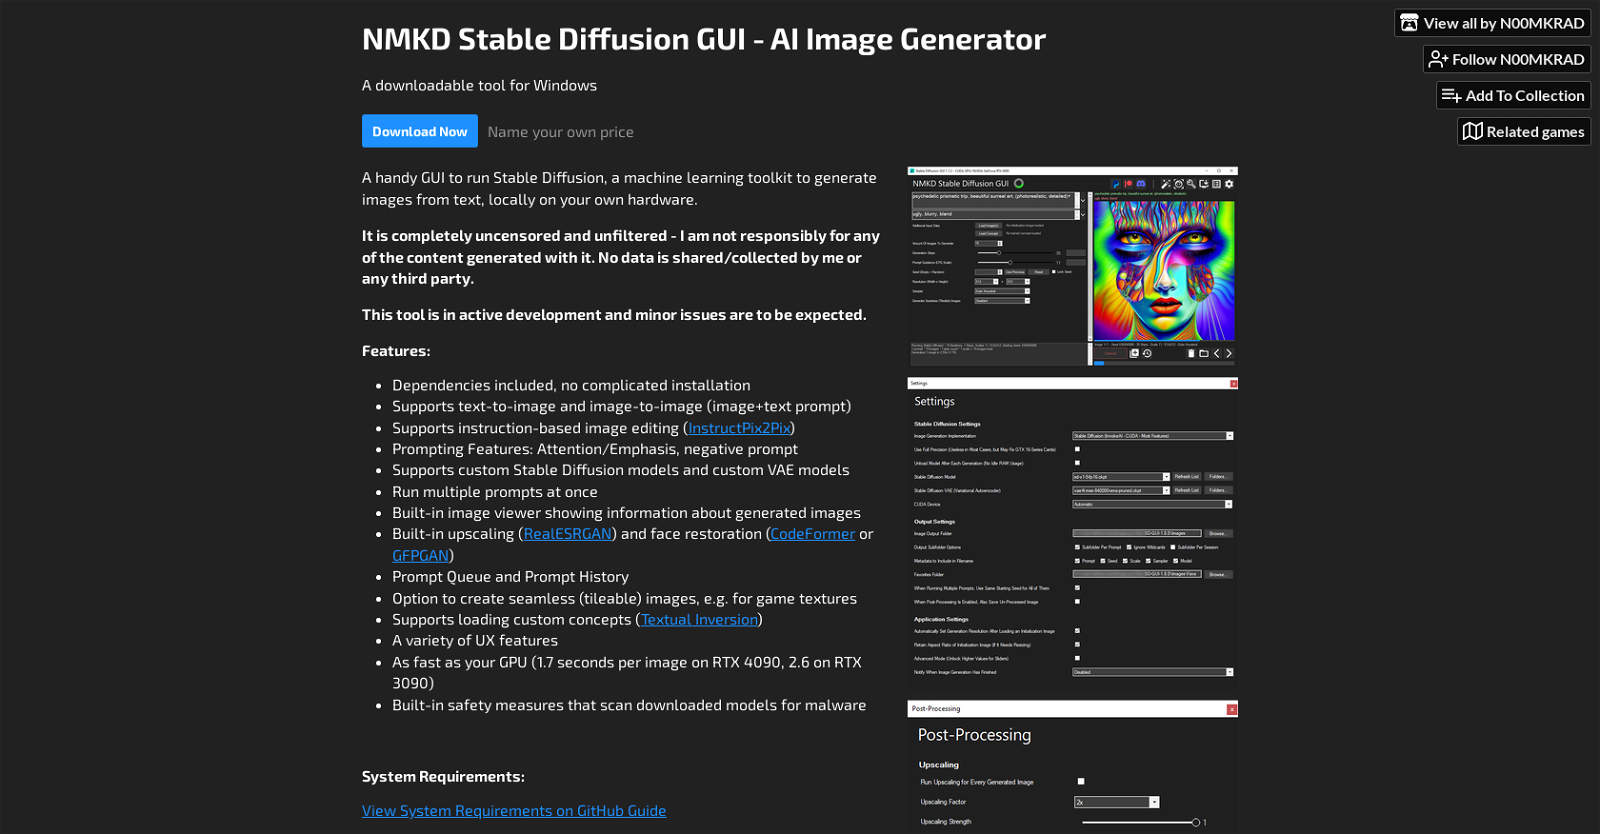 NMKD Stable Diffusion website